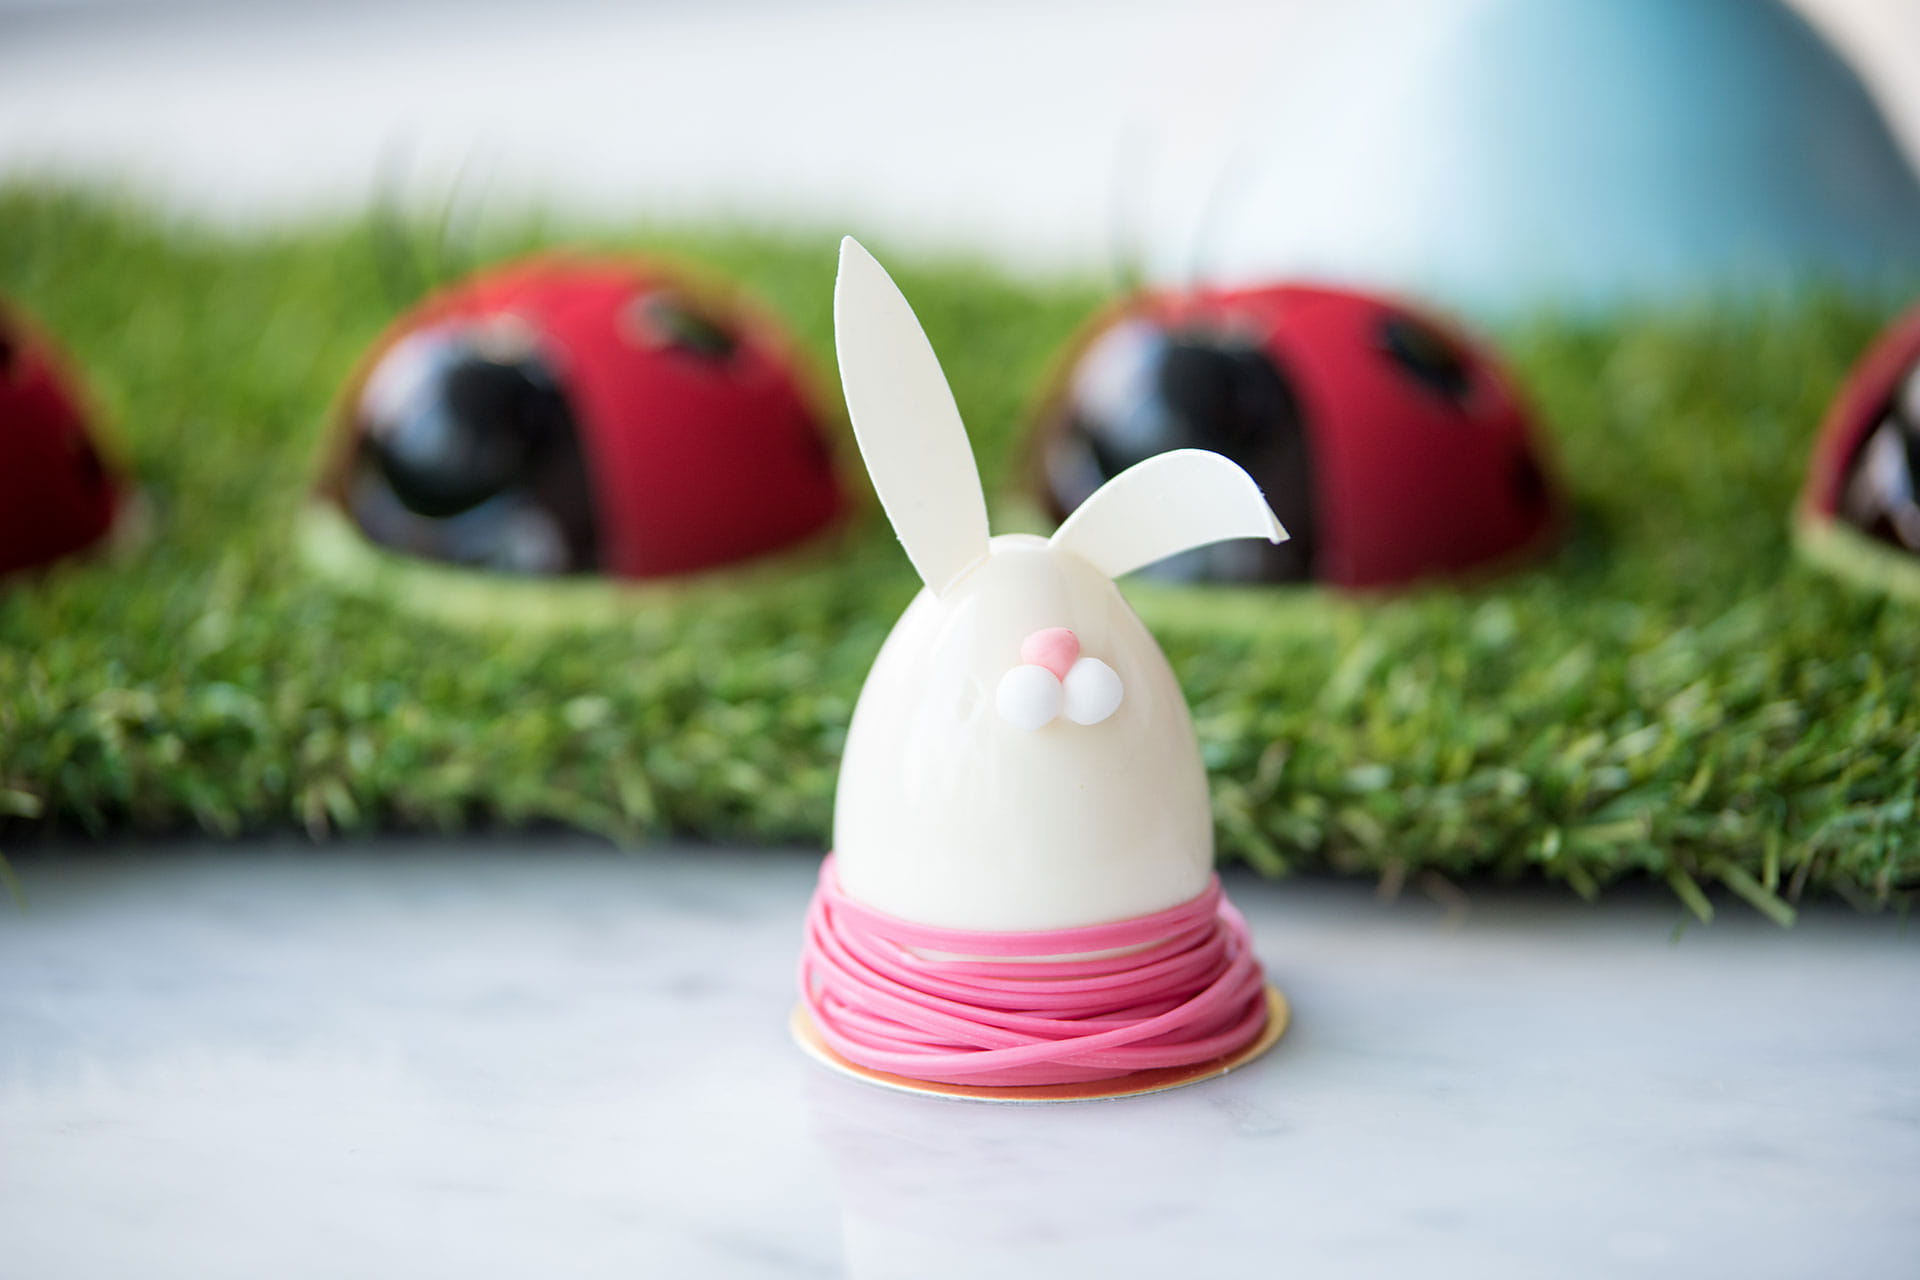 Dolce 88 is changing it up with chocolate mousse bunnies